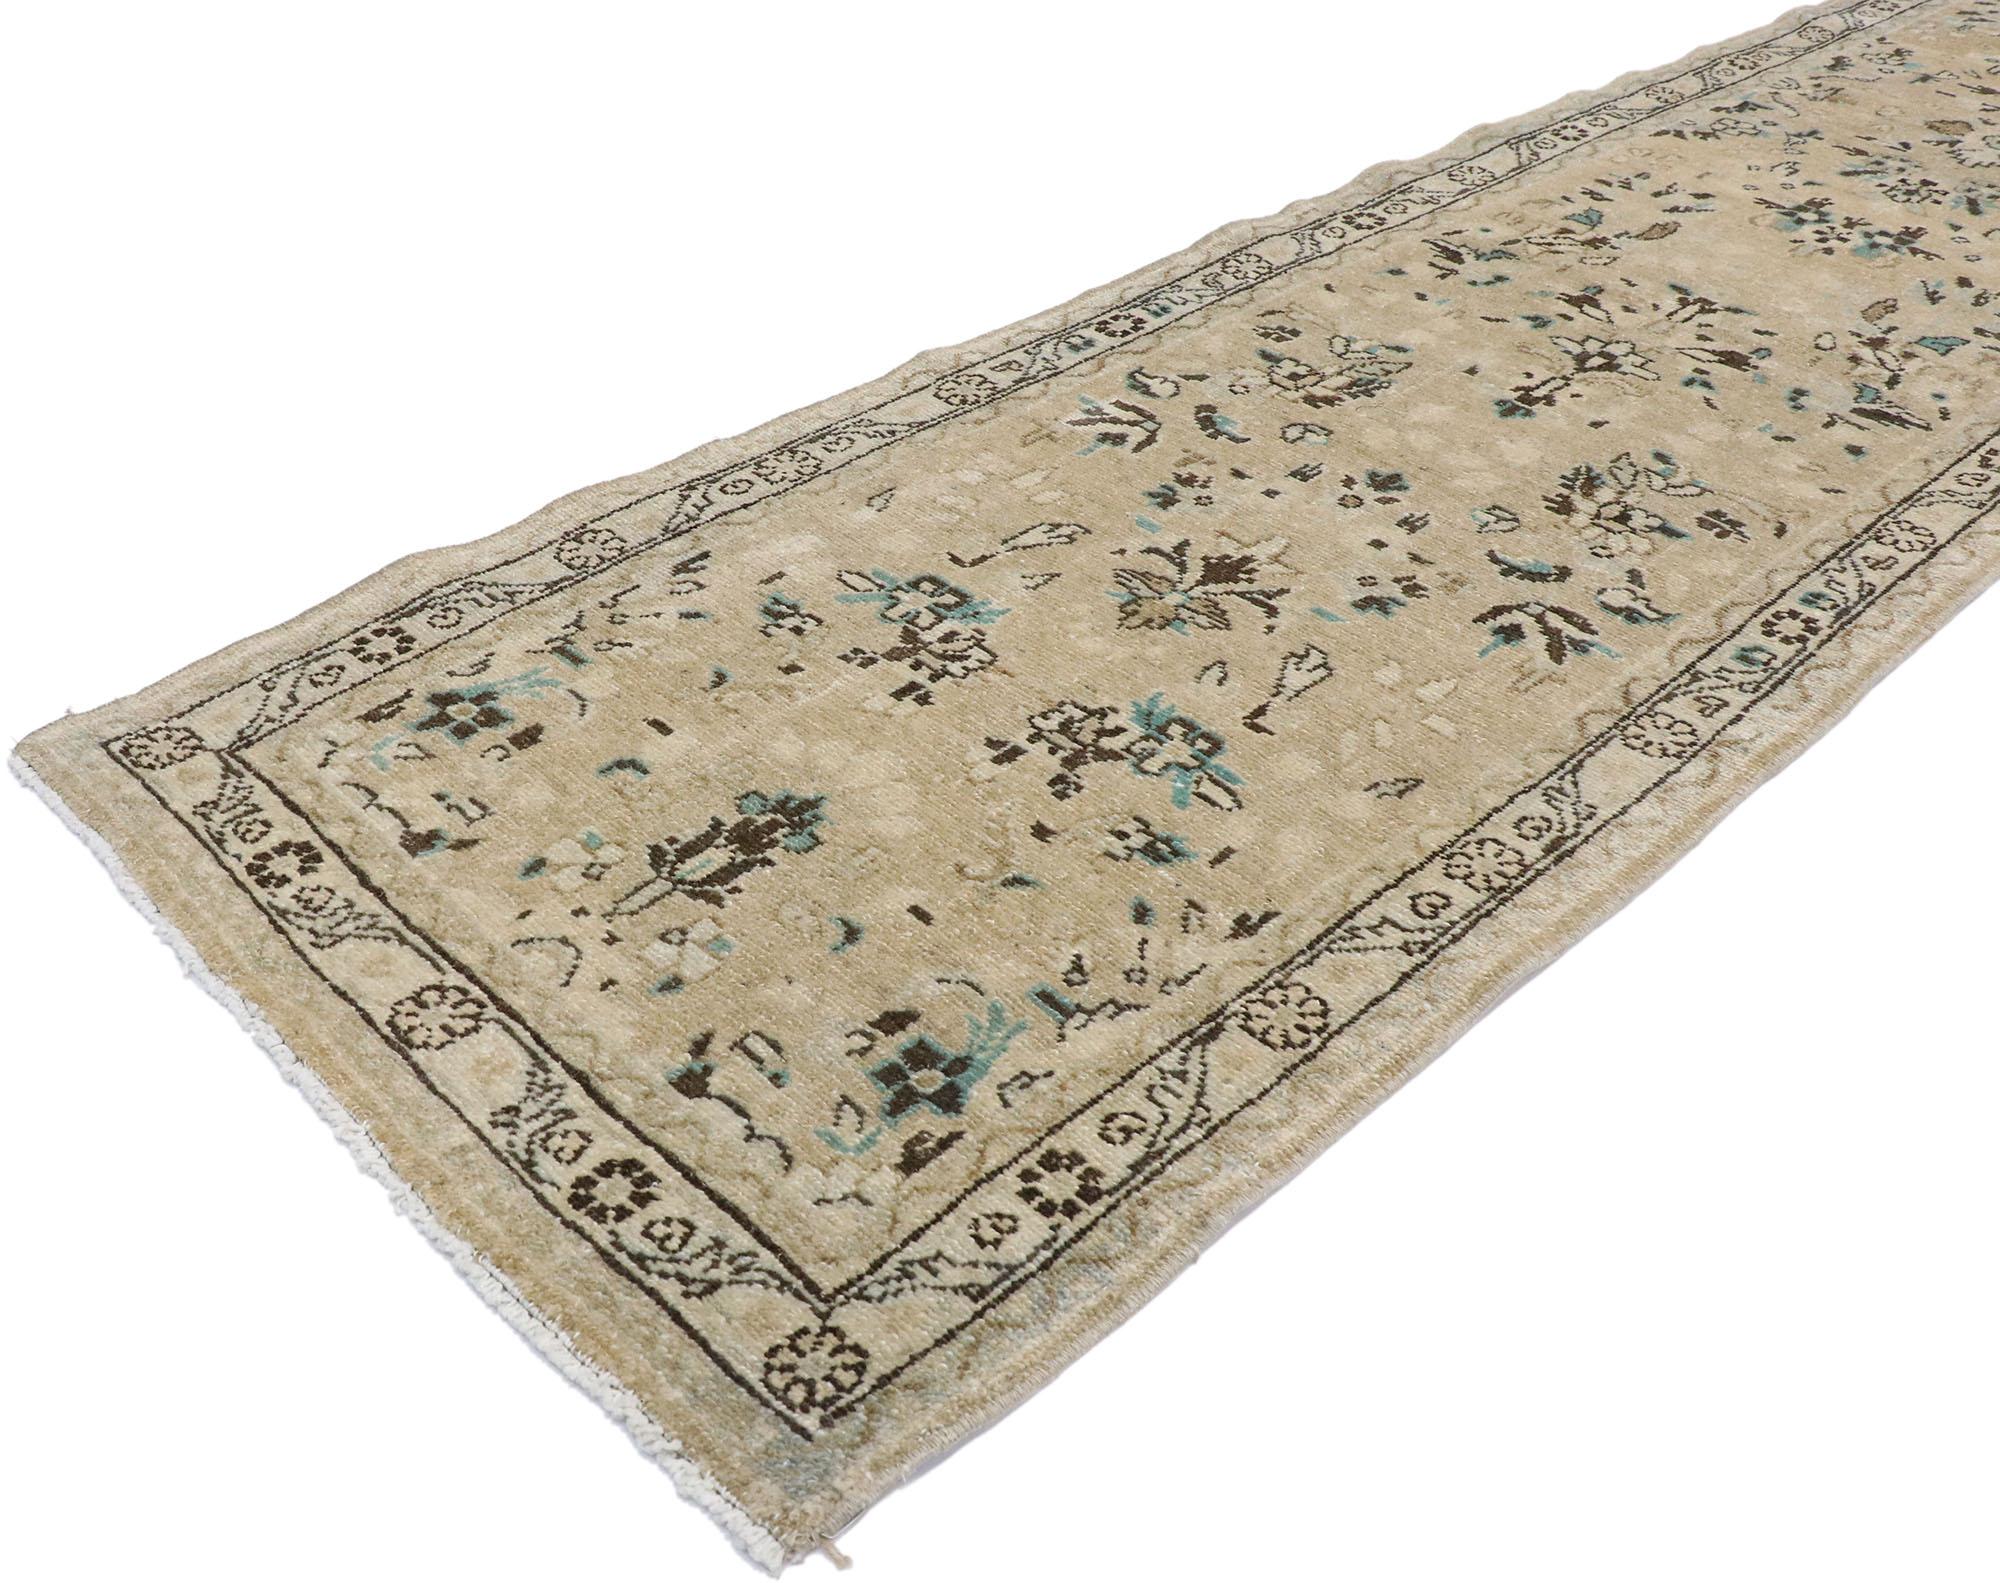 53398, vintage Persian Hamadan runner with Romantic French cottage style with timeless floral design and soft colors, this hand knotted wool vintage Persian Hamadan runner charms with ease and beautifully embodies a romantic French cottage style.